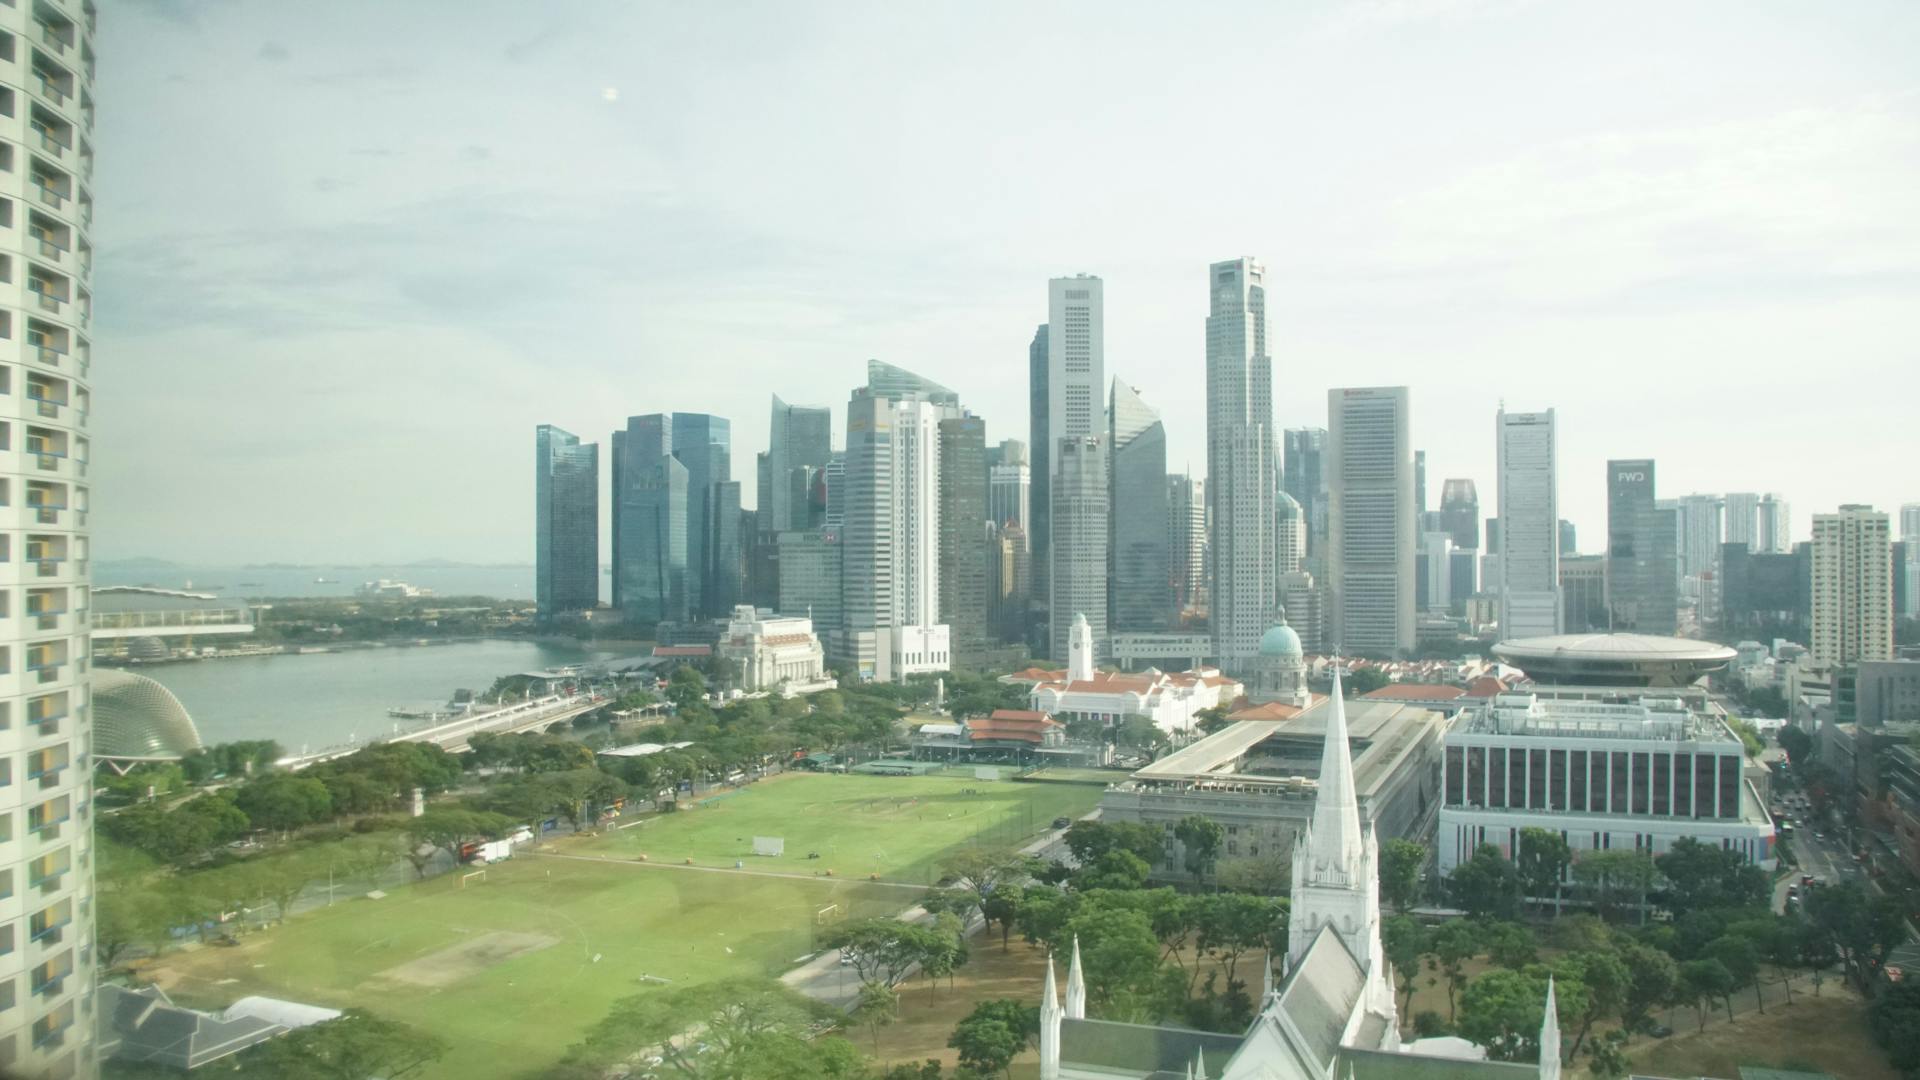 A photograph taken out of a window of the Singapore skyline with a park un the foreground